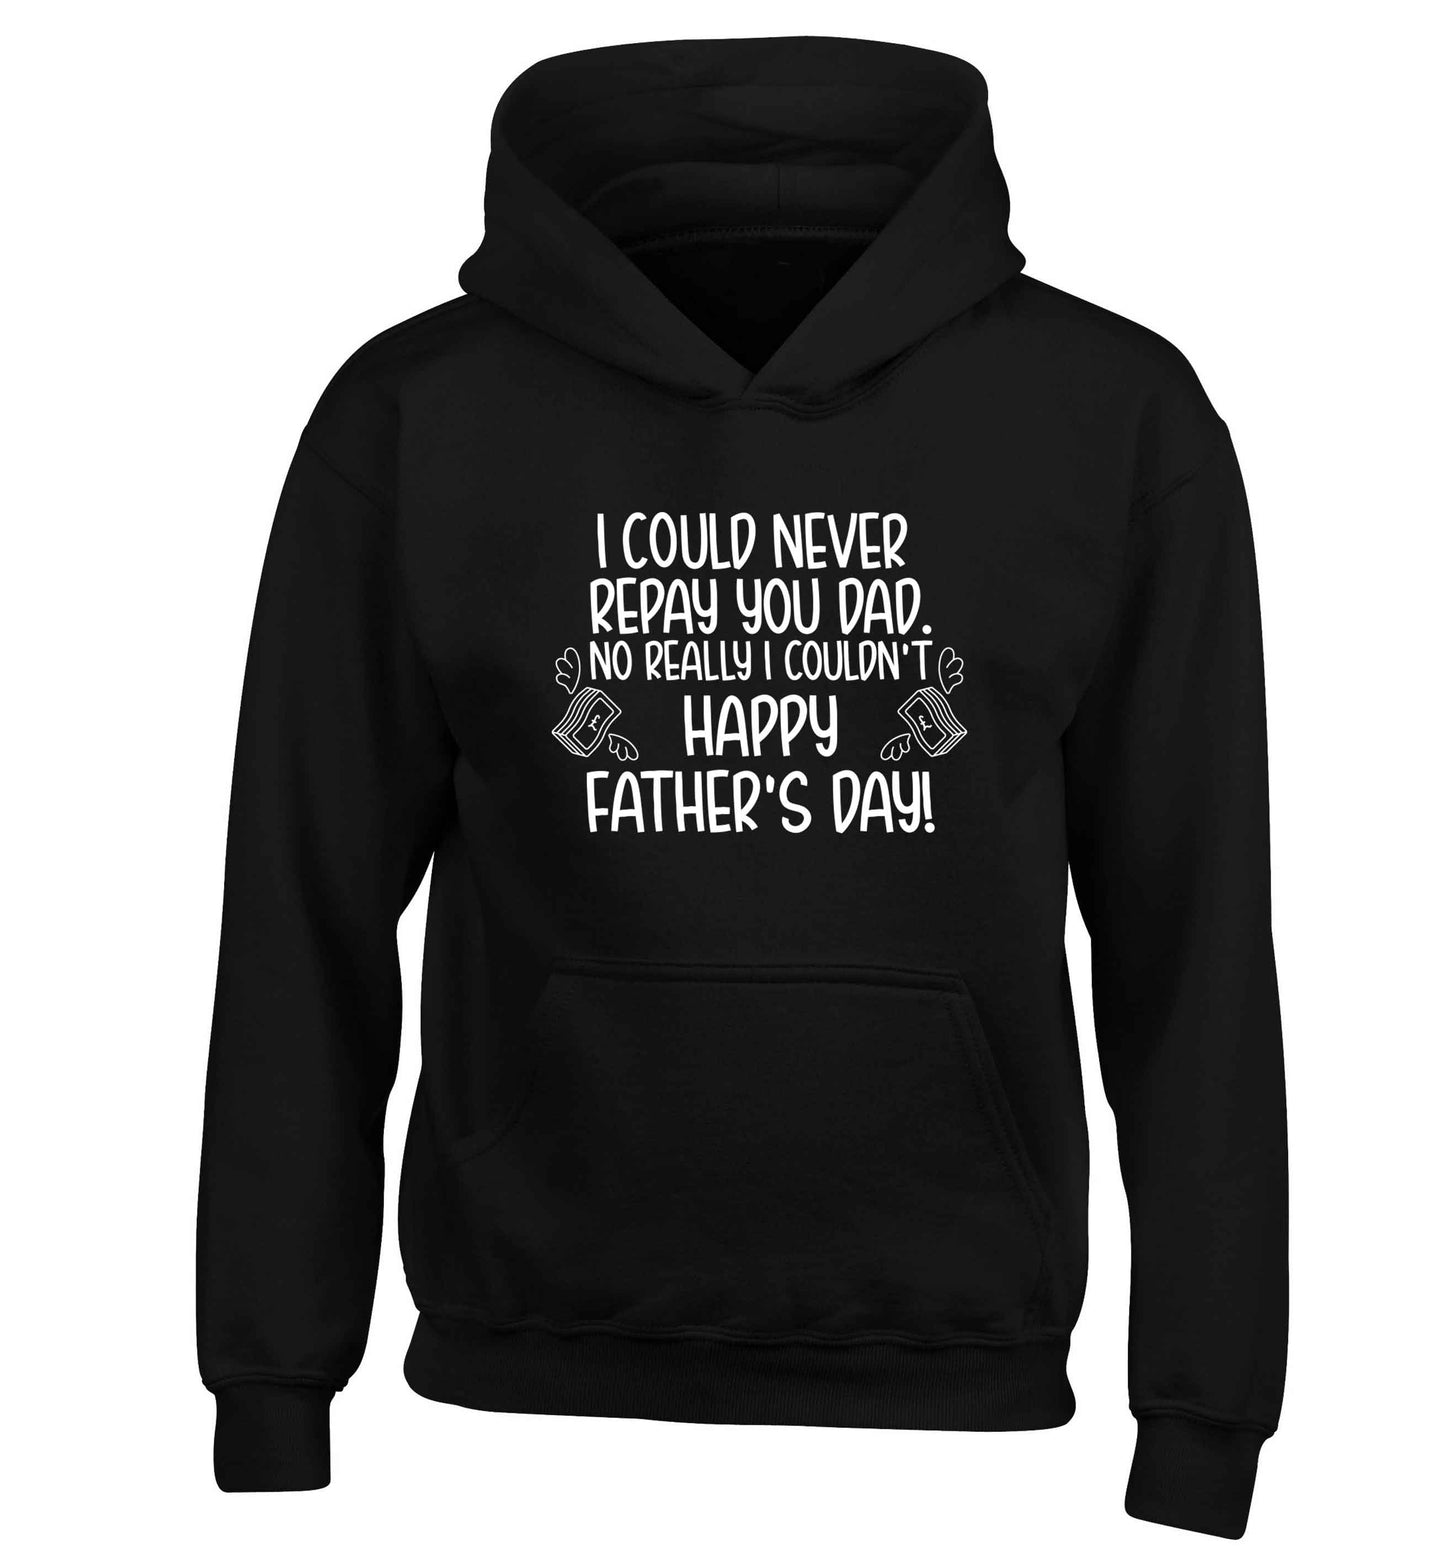 I could never repay you dad. No I really couldn't happy Father's day! children's black hoodie 12-13 Years